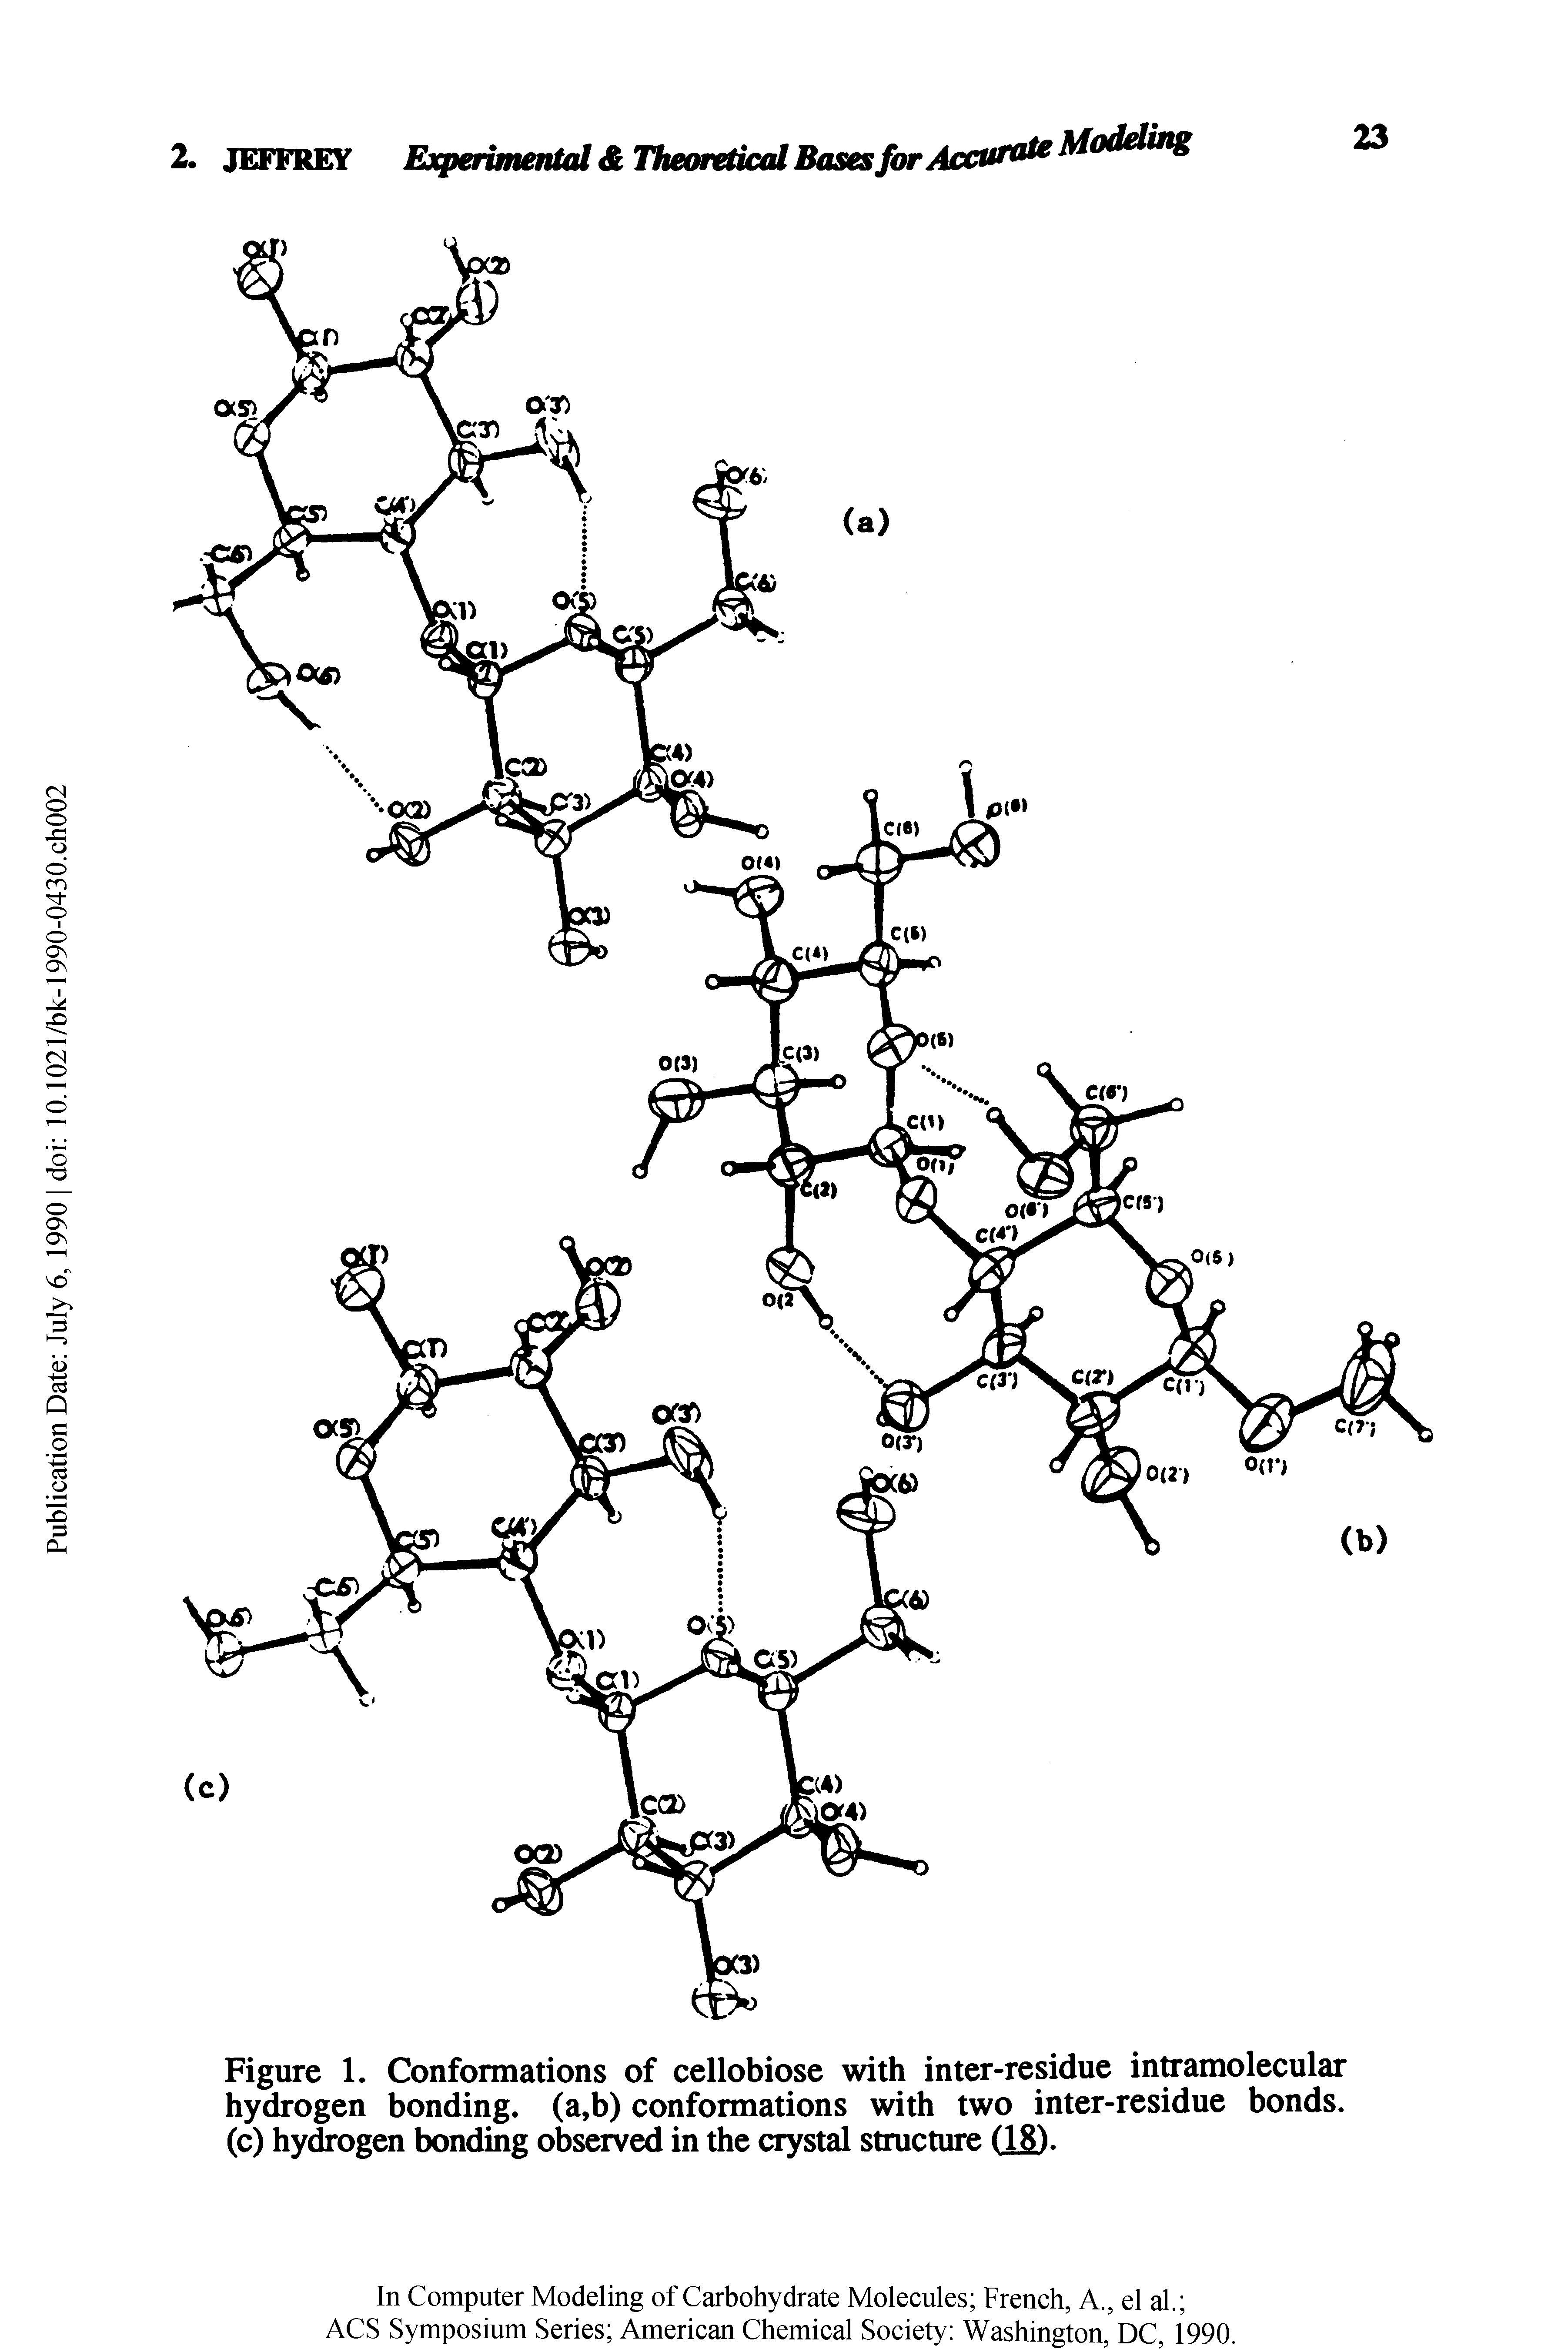 Figure 1. Conformations of cellobiose with inter-residue intramolecular hydrogen bonding. (a,b) conformations with two inter-residue bonds, (c) hydrogen bonding observed in the crystal structure (18).